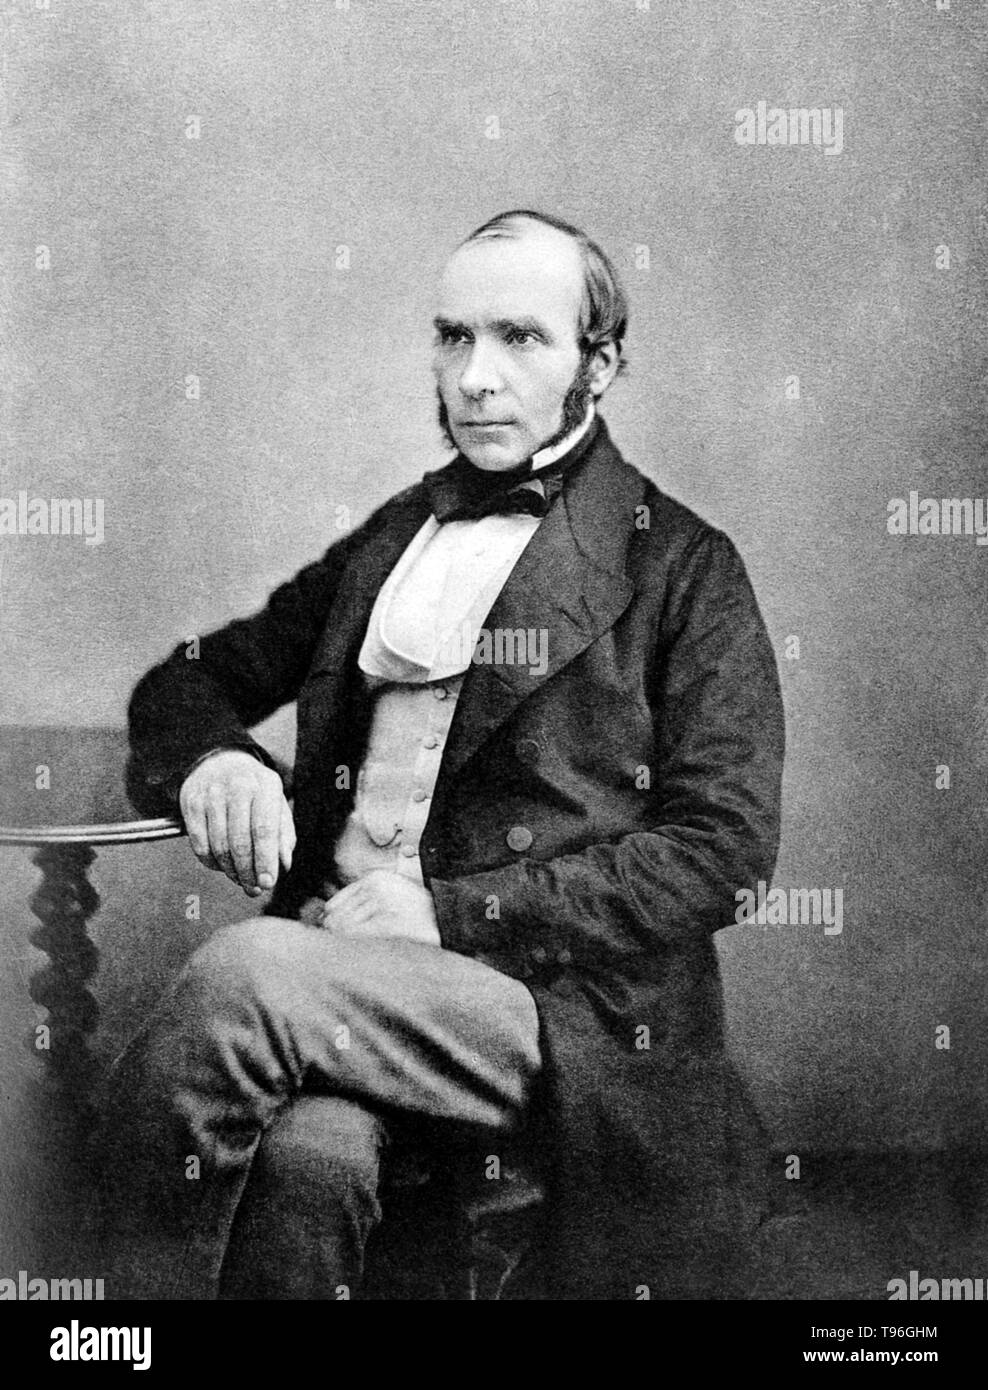 John Snow (March 15, 1813 - June 16, 1858) was an English physician and a leader in the adoption of anesthesia and medical hygiene. He is considered one of the fathers of modern epidemiology, in part because of his work in tracing the source of a cholera outbreak in Soho, London, in 1854. His findings inspired fundamental changes in the water and waste systems of London, which led to similar changes in other cities, and a significant improvement in general public health around the world. Snow suffered a stroke while working in his office. He never recovered, dying in 1858, at the age of 45. Stock Photo